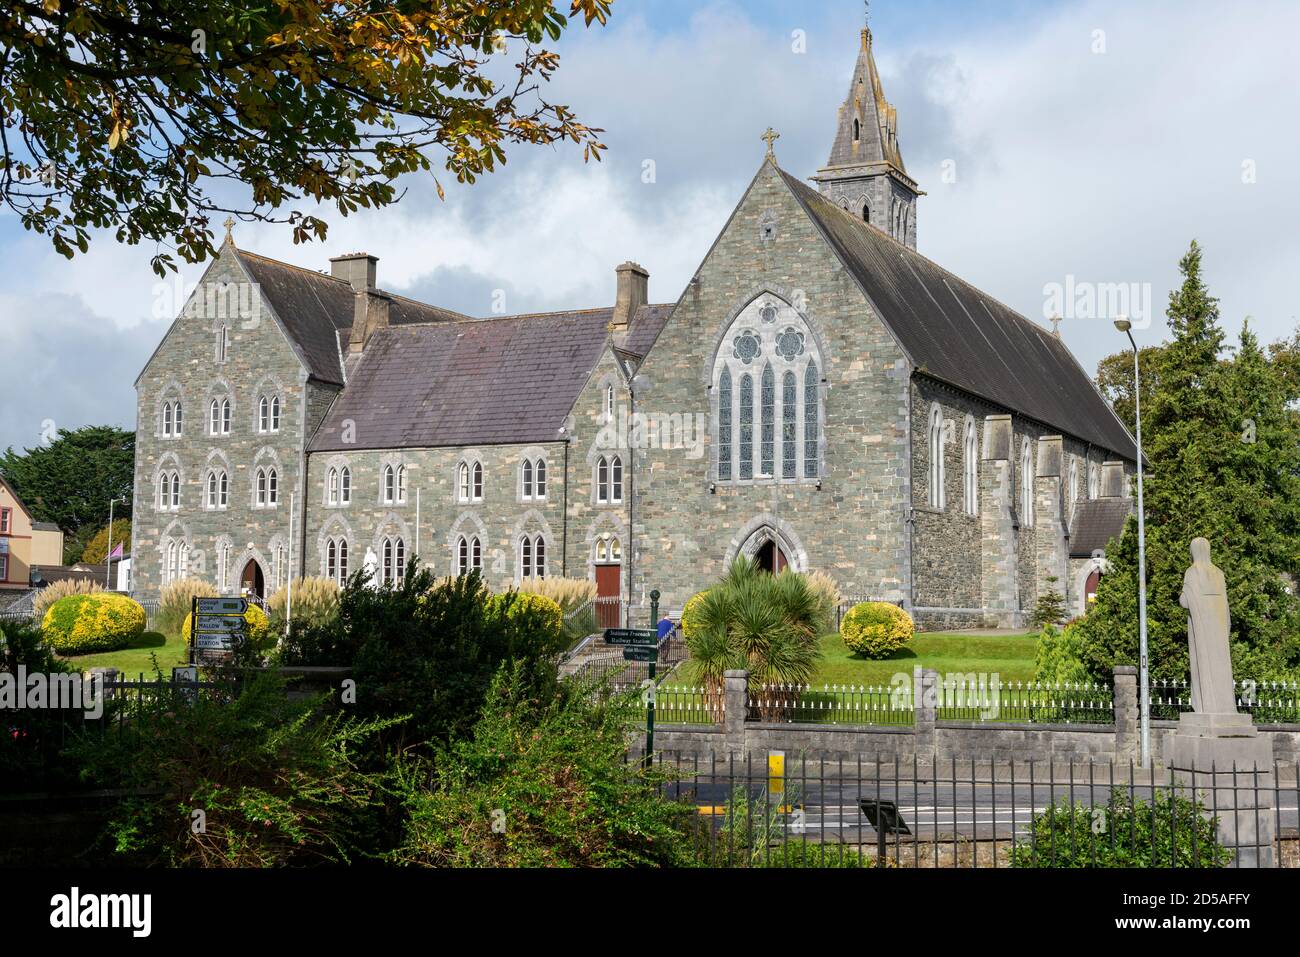 Religion Ireland and The Franciscan Friary Church Killarney as a Gothic Revival style church by architect Edward Welby Pugin in Killarney County Kerry Stock Photo